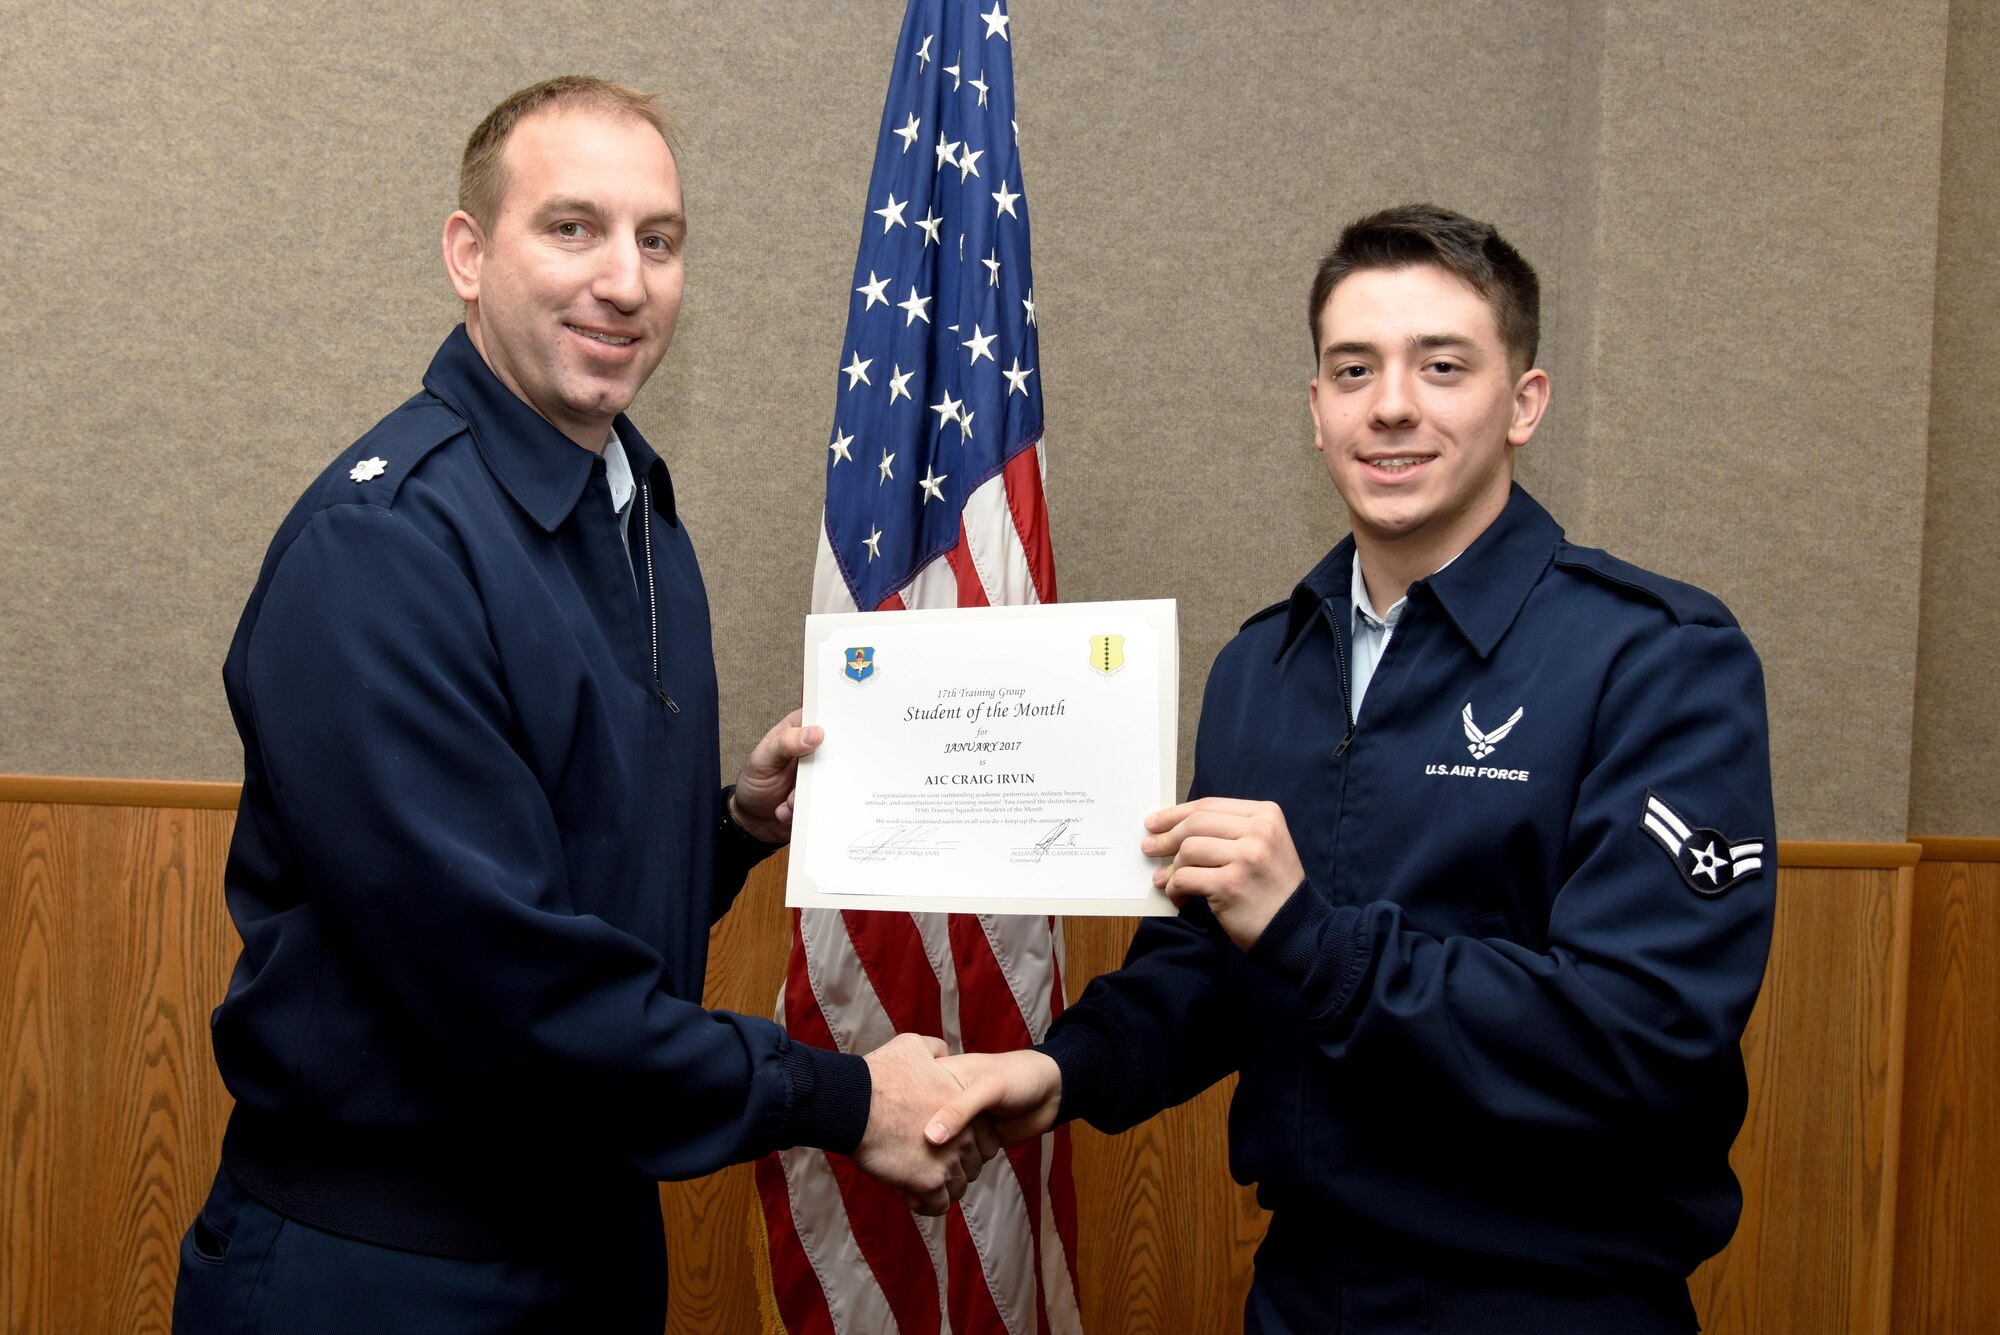 U.S. Air Force Lt. Col. Jason Kulchar, 315th Training Squadron director of operations, presents the 315th Training Squadron Student of the Month award for January 2017 to Airman 1st Class Craig Irvin, 315th TRS student, in the Brandenburg Hall on Goodfellow Air Force Base, Texas, Feb. 3, 2017. (U.S. Air Force photo by Staff Sgt. Joshua Edwards/Released)